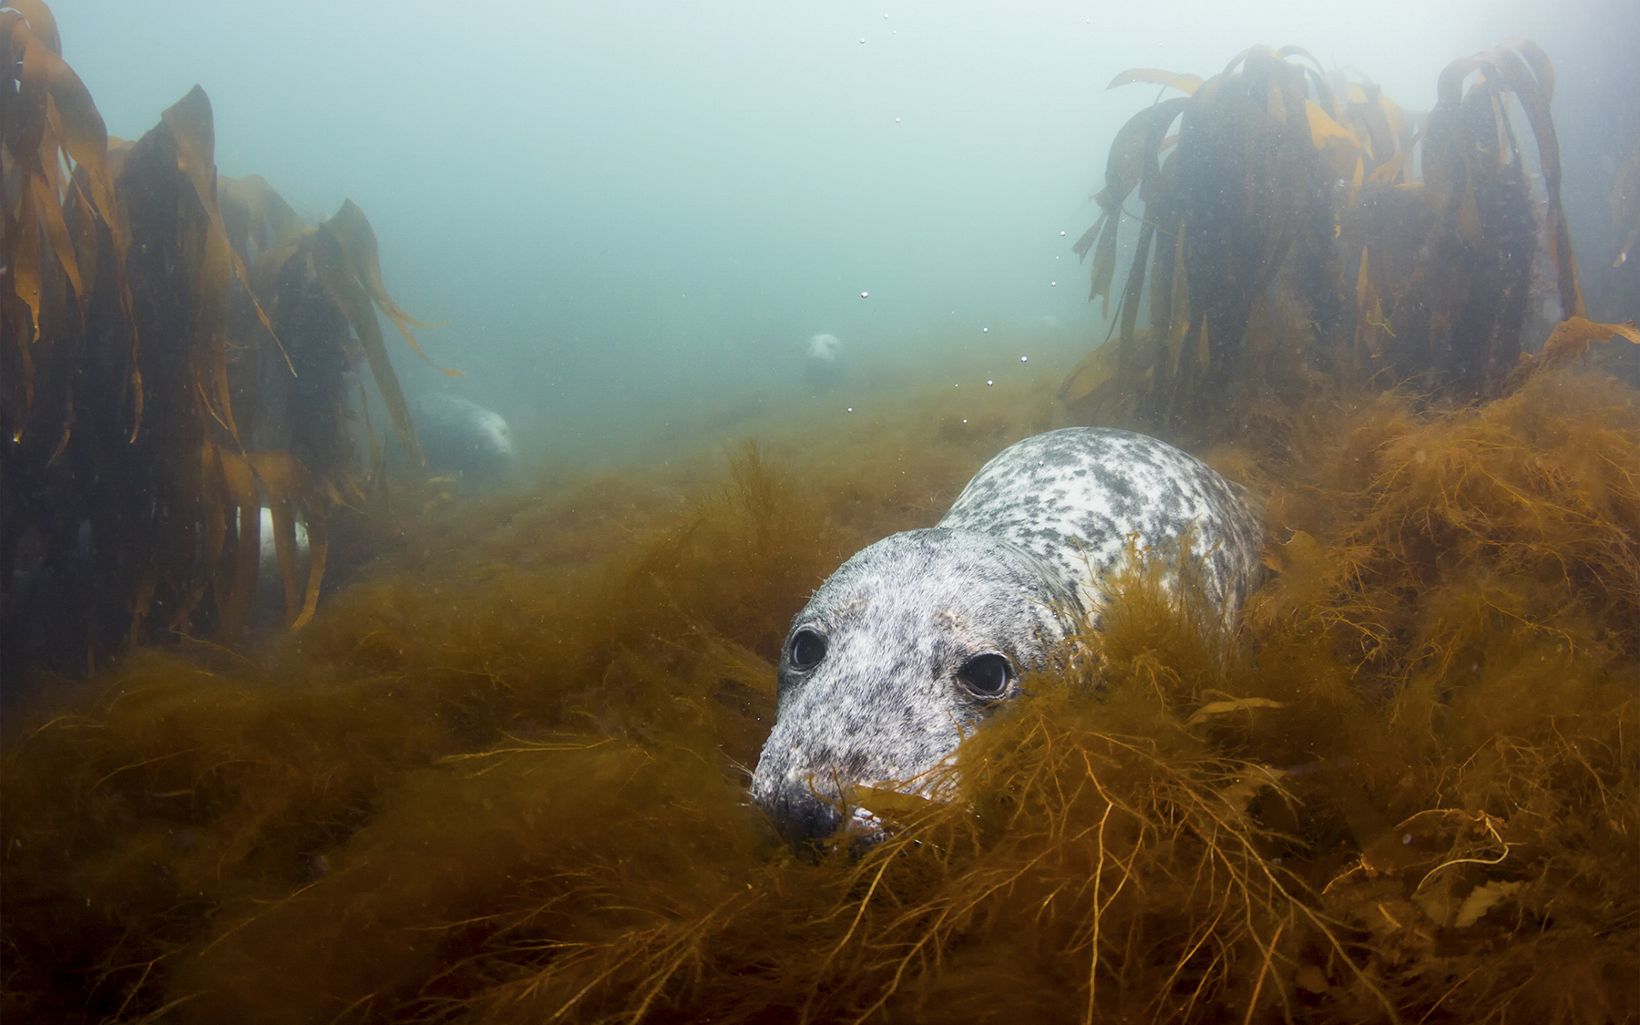 Underwater lounging. A group of grey seals get some rest in a soft bed of algae. © Isabella Chowra